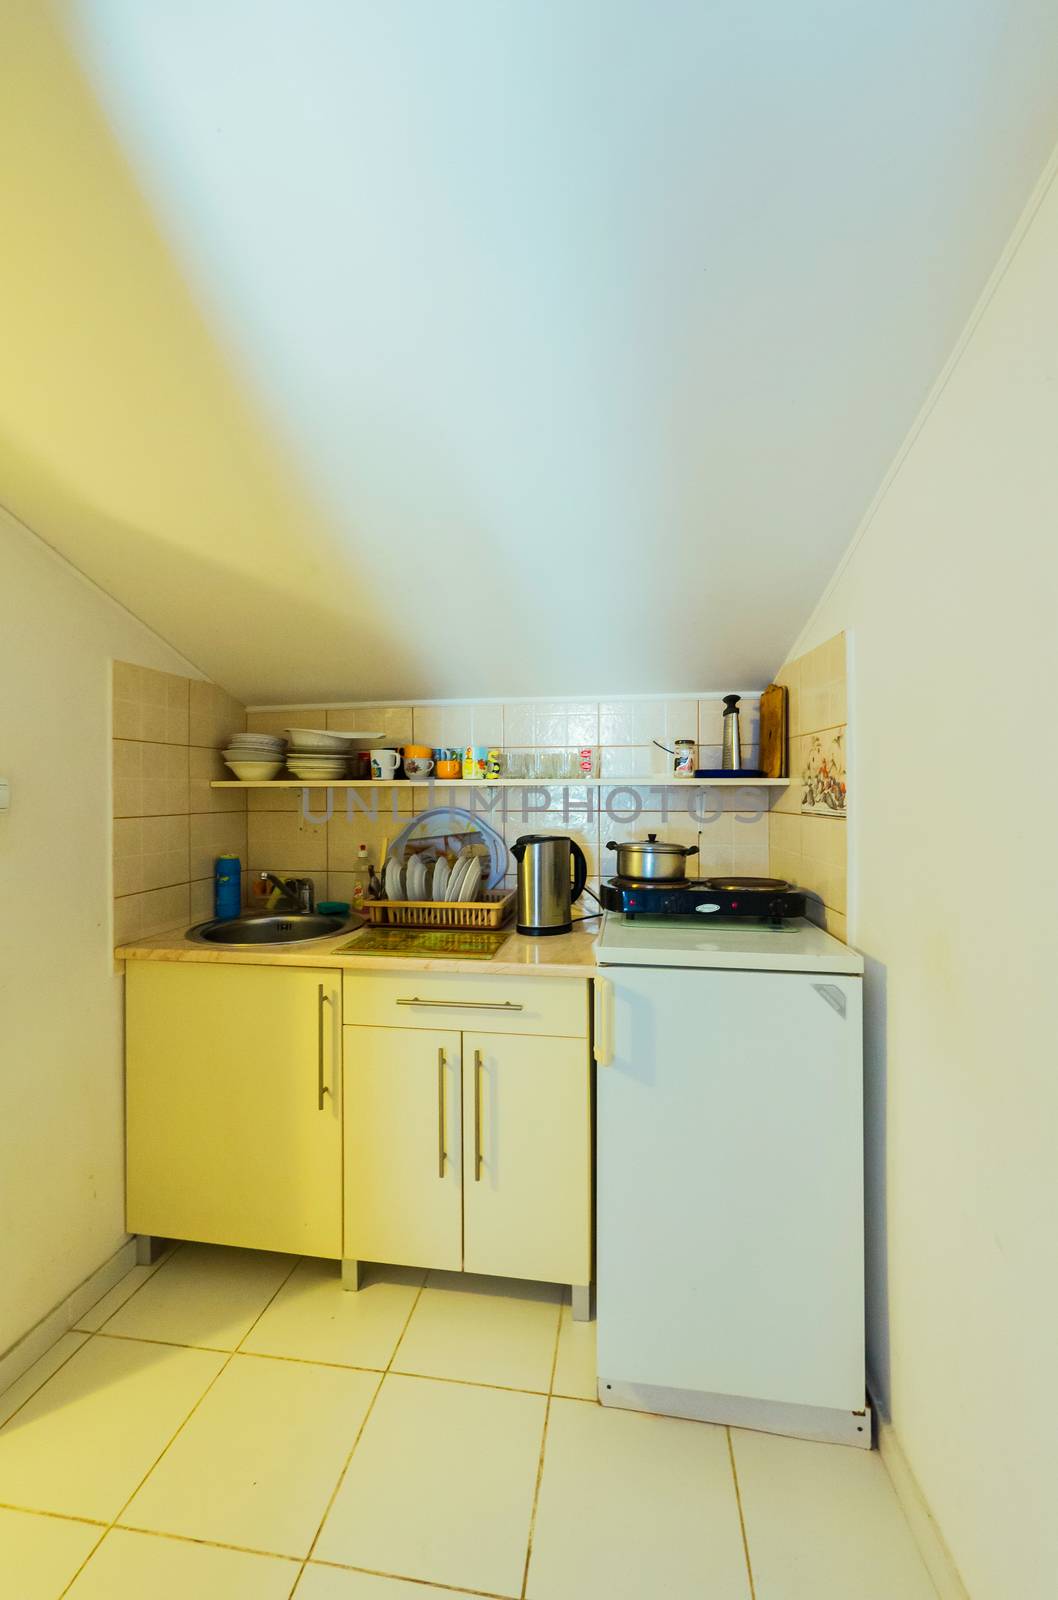 A small cozy kitchen in light colors by Adamchuk